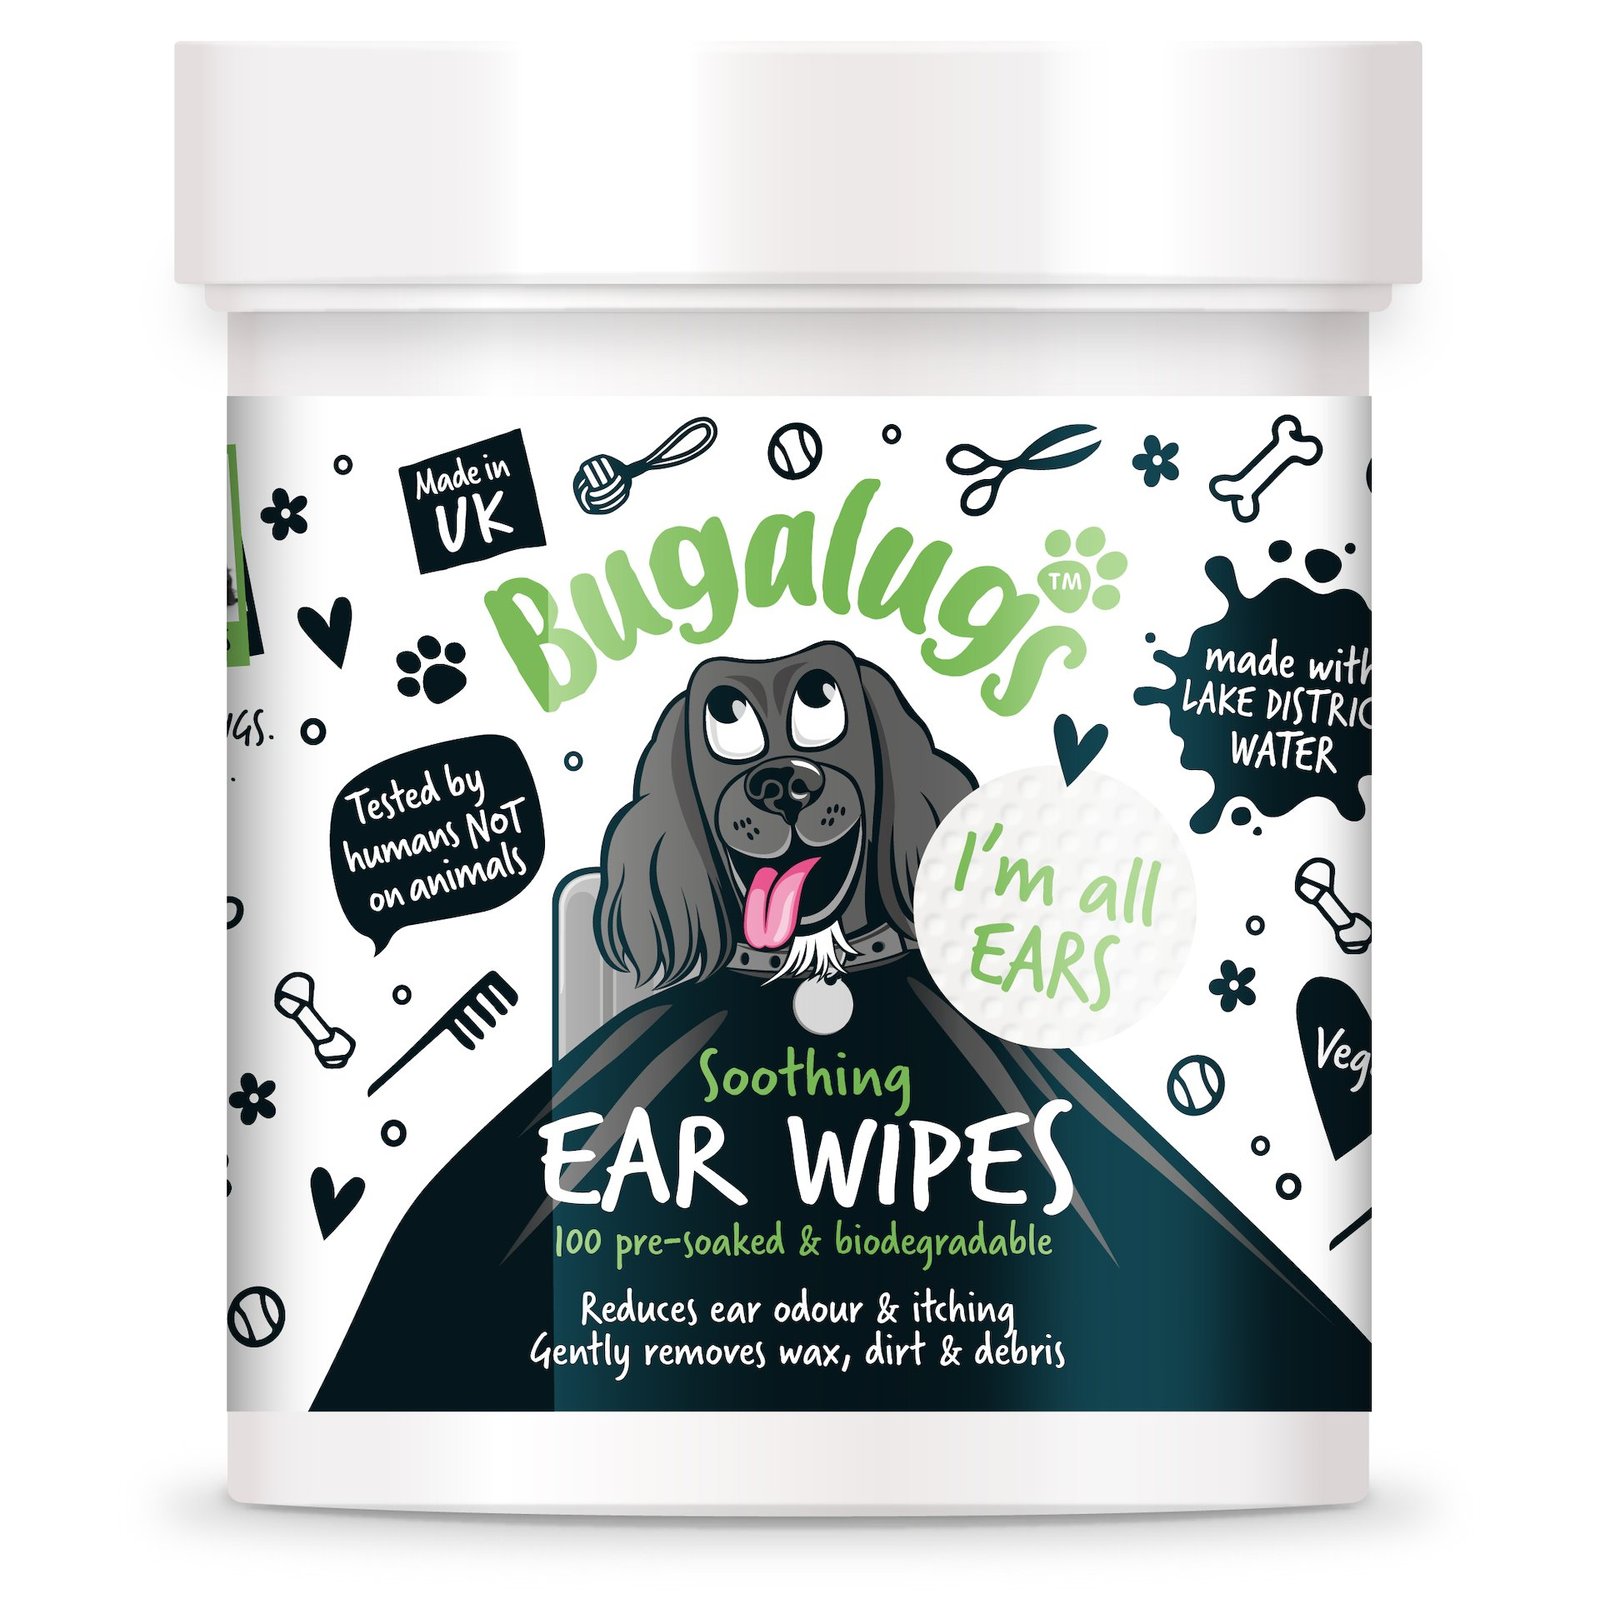 Bugalugs Soothing Pre-Soaked Ear Pads 100 st